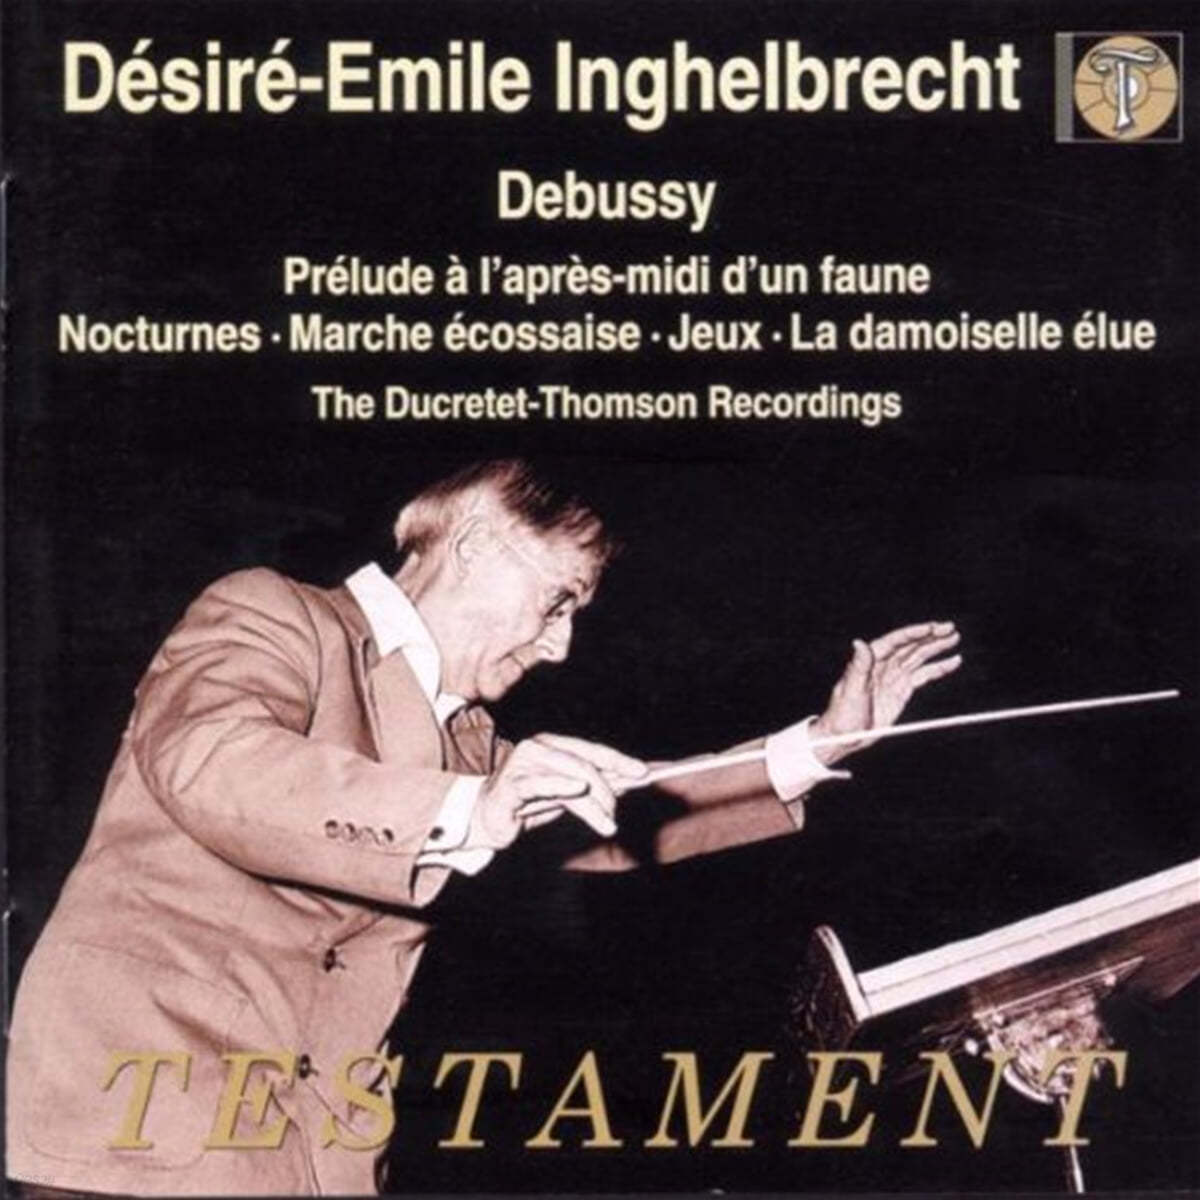 Desire-Emile Inghelbrecht 드뷔시: 관현악을 위한 작품 모음집 (Debussy: Orchestral Works) 